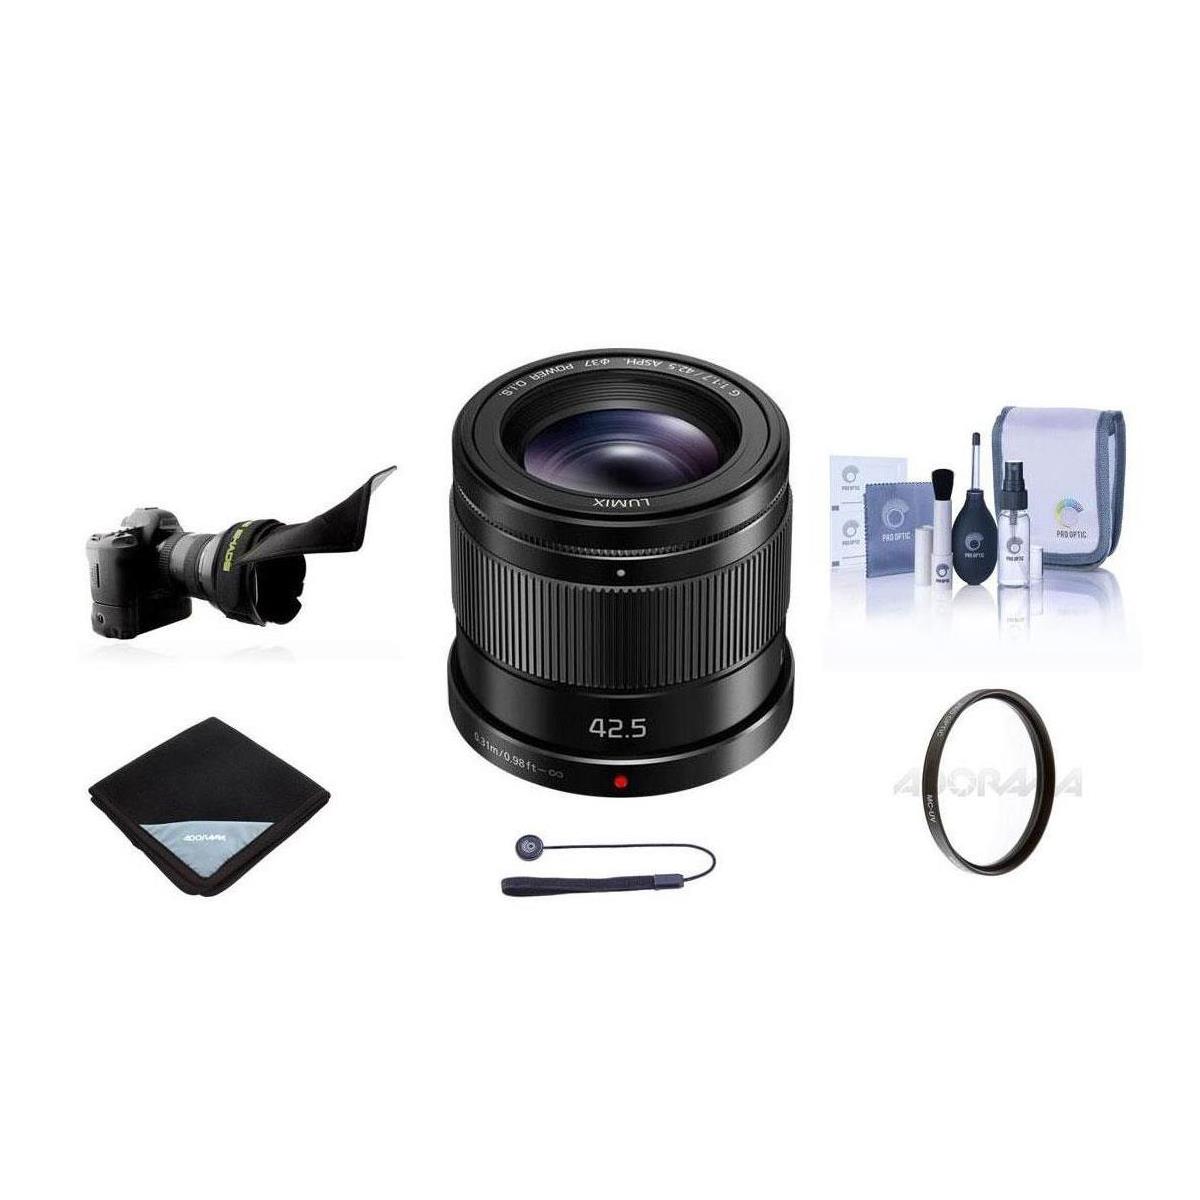 Image of Panasonic Lumix G 42.5mm f/1.7 Aspherical Lens for MFT with Accessories Kit